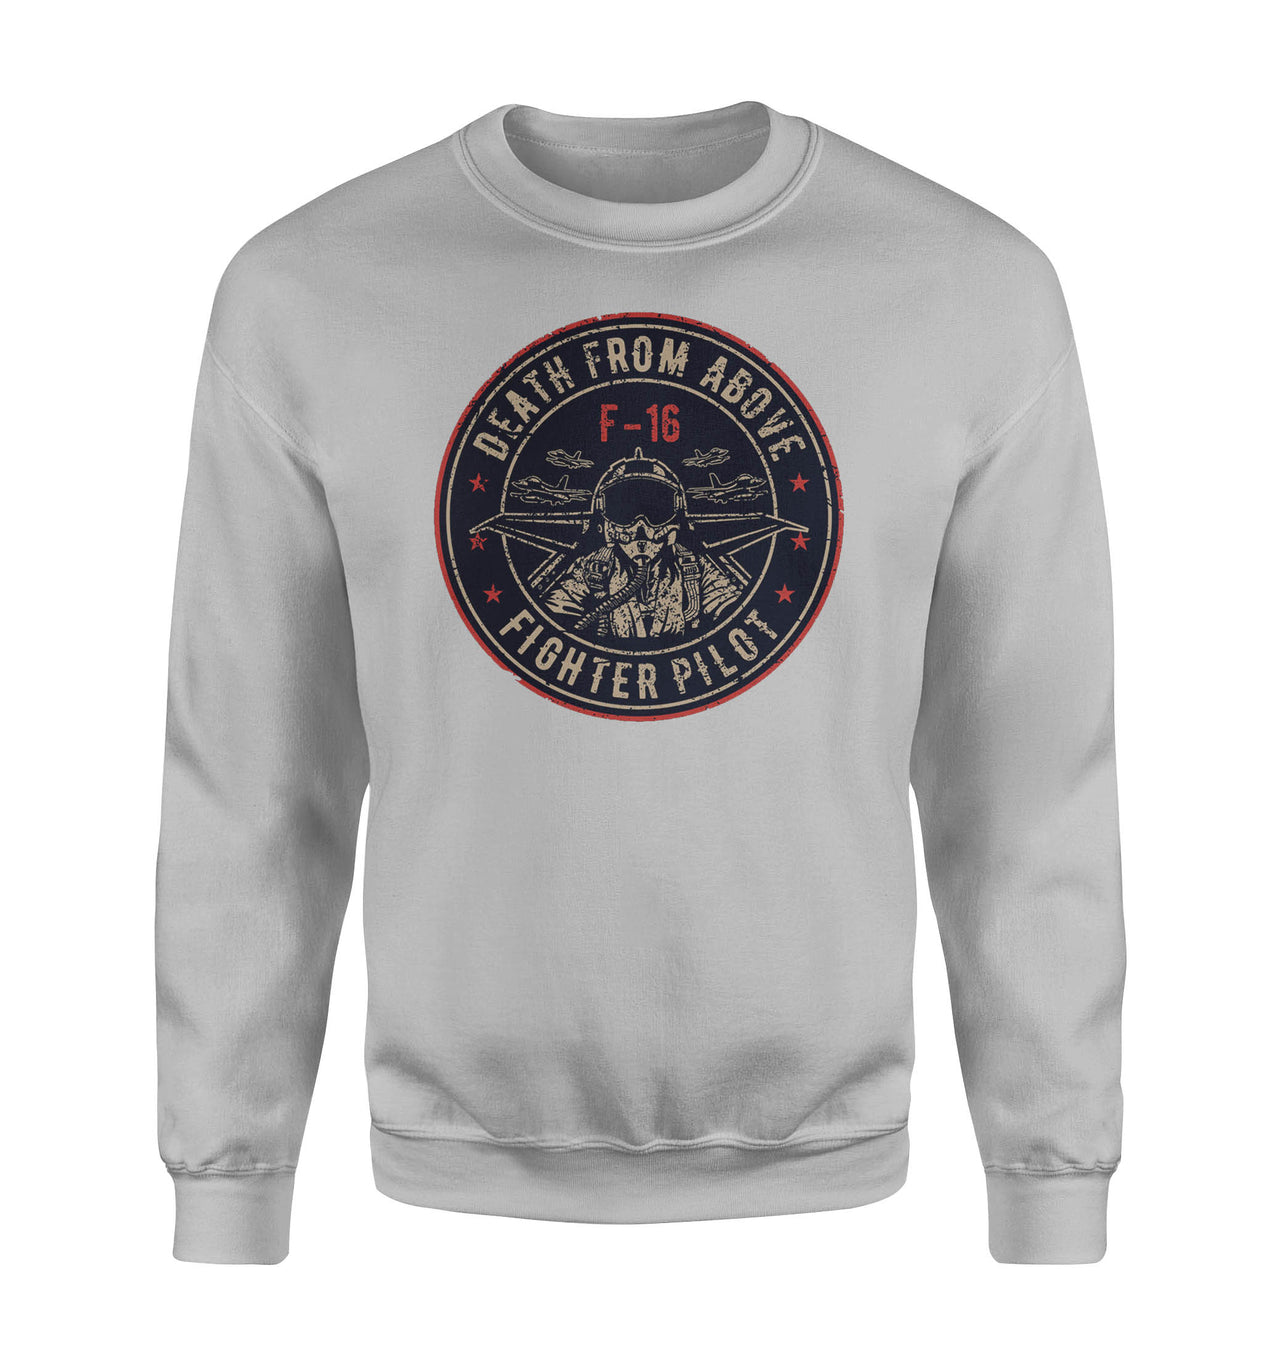 Fighting Falcon F16 - Death From Above Designed Sweatshirts